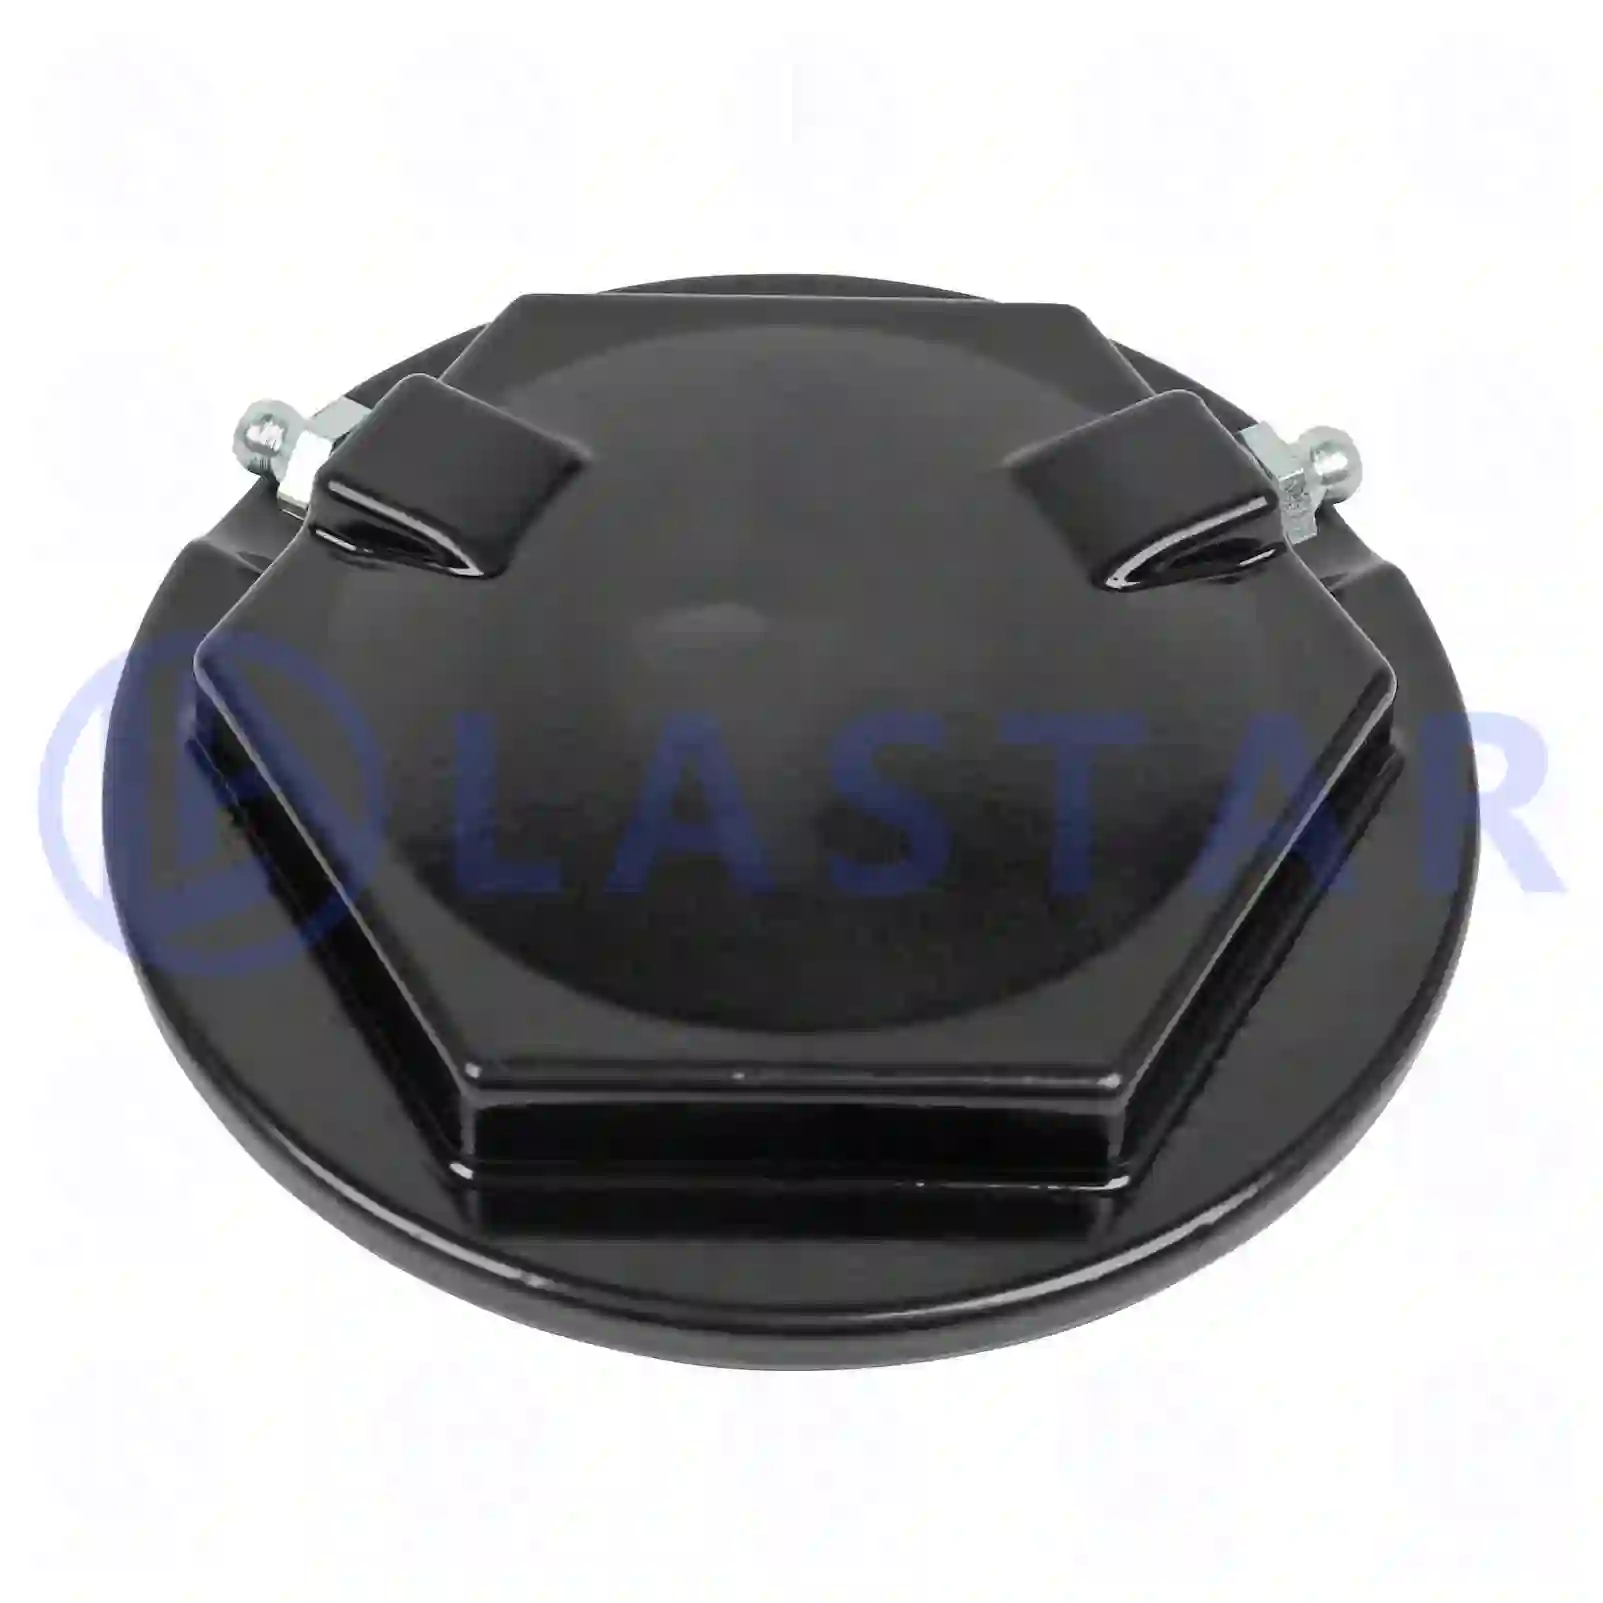 Cover, steering knuckle, 77731174, 7420399428, 1077993, 1078563, 20399428, ZG41250-0008 ||  77731174 Lastar Spare Part | Truck Spare Parts, Auotomotive Spare Parts Cover, steering knuckle, 77731174, 7420399428, 1077993, 1078563, 20399428, ZG41250-0008 ||  77731174 Lastar Spare Part | Truck Spare Parts, Auotomotive Spare Parts